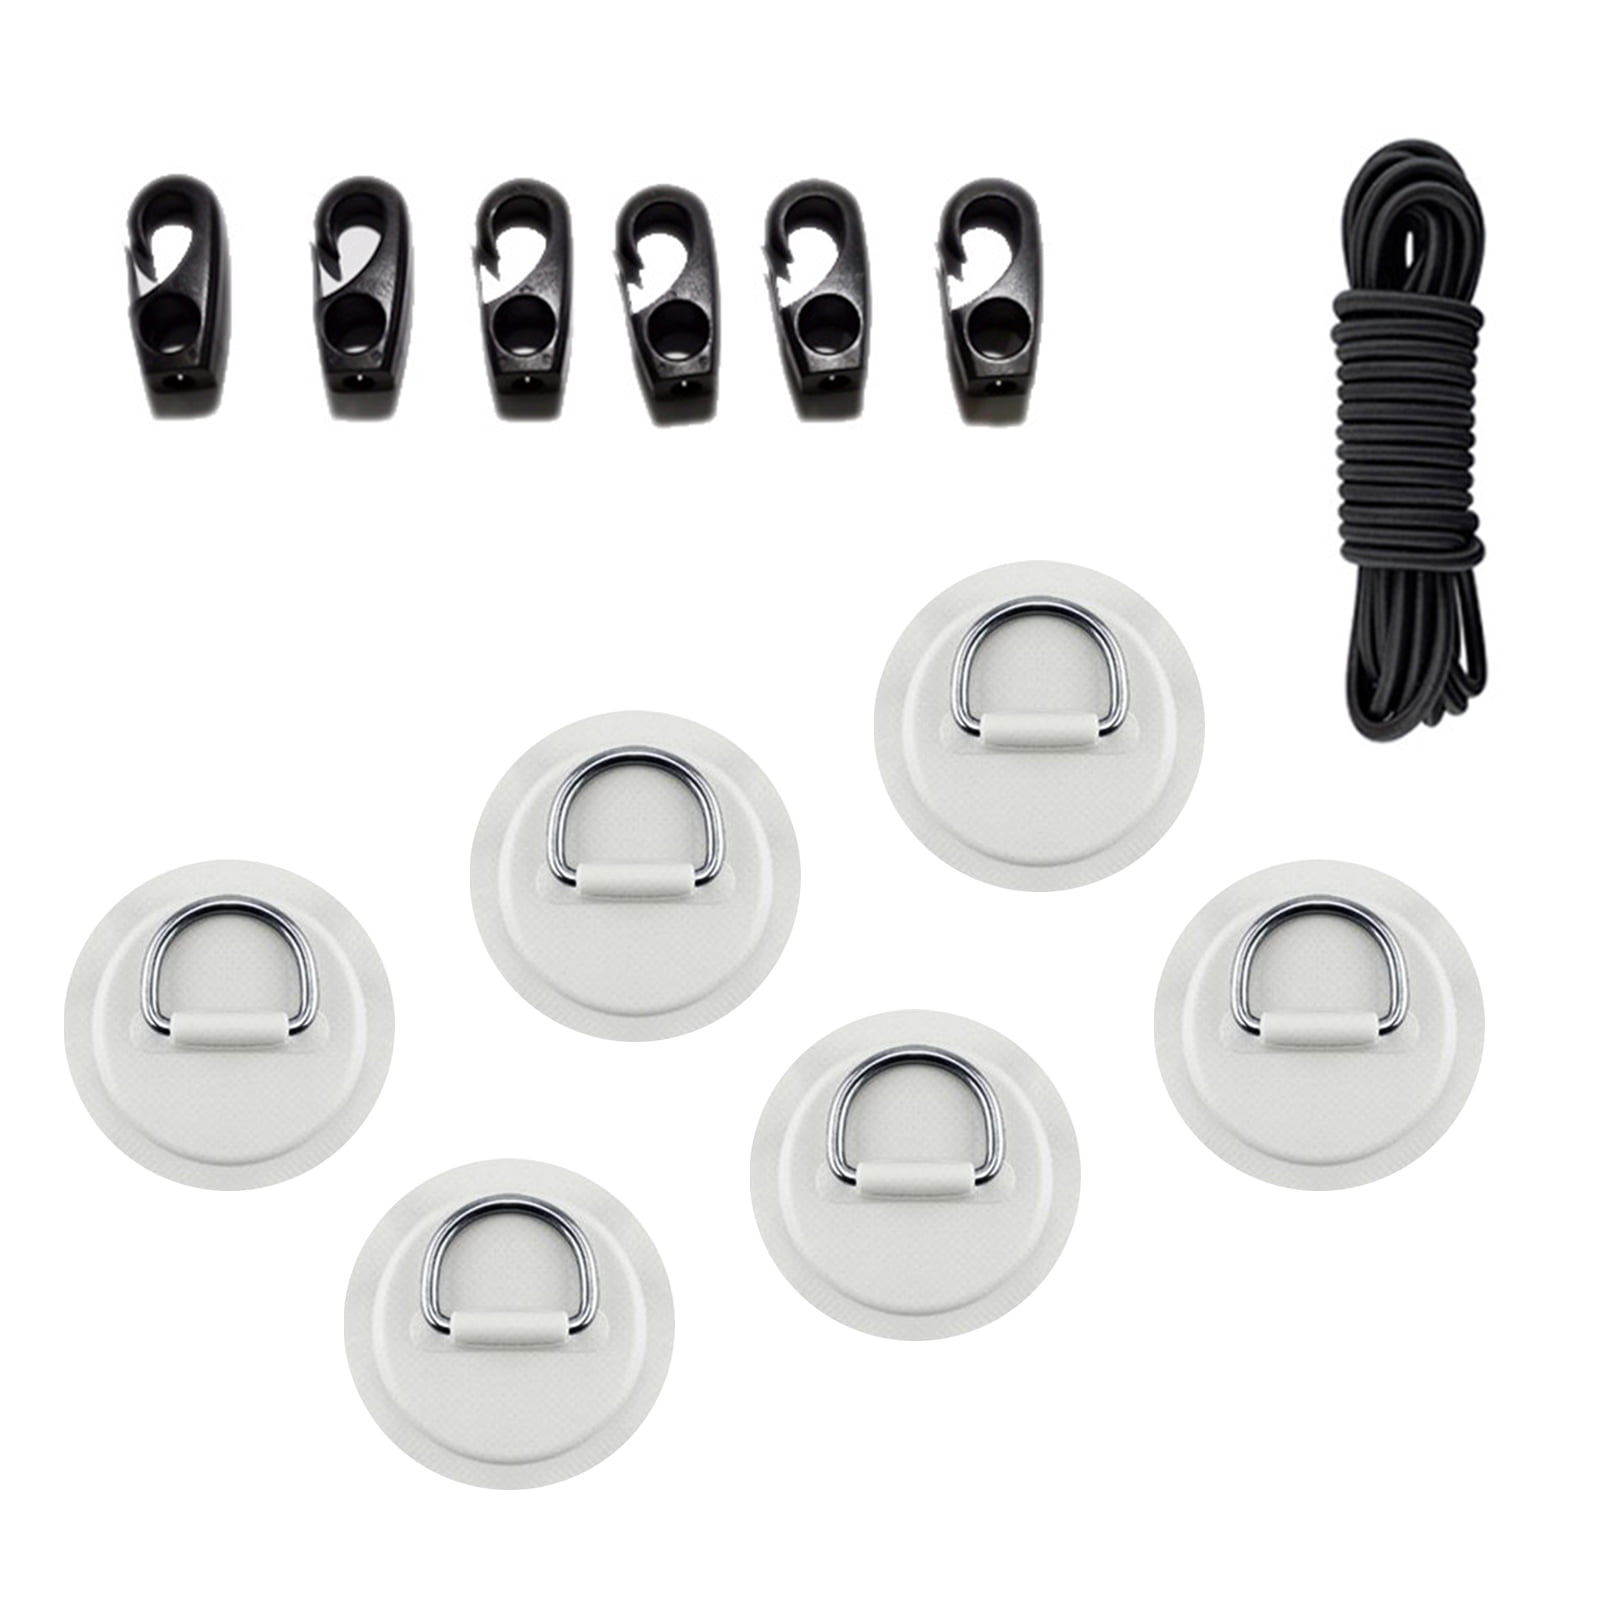 6Pcs D-ring Pad Patch Deck Attachment Kit Accessories with Shock Cord Black 